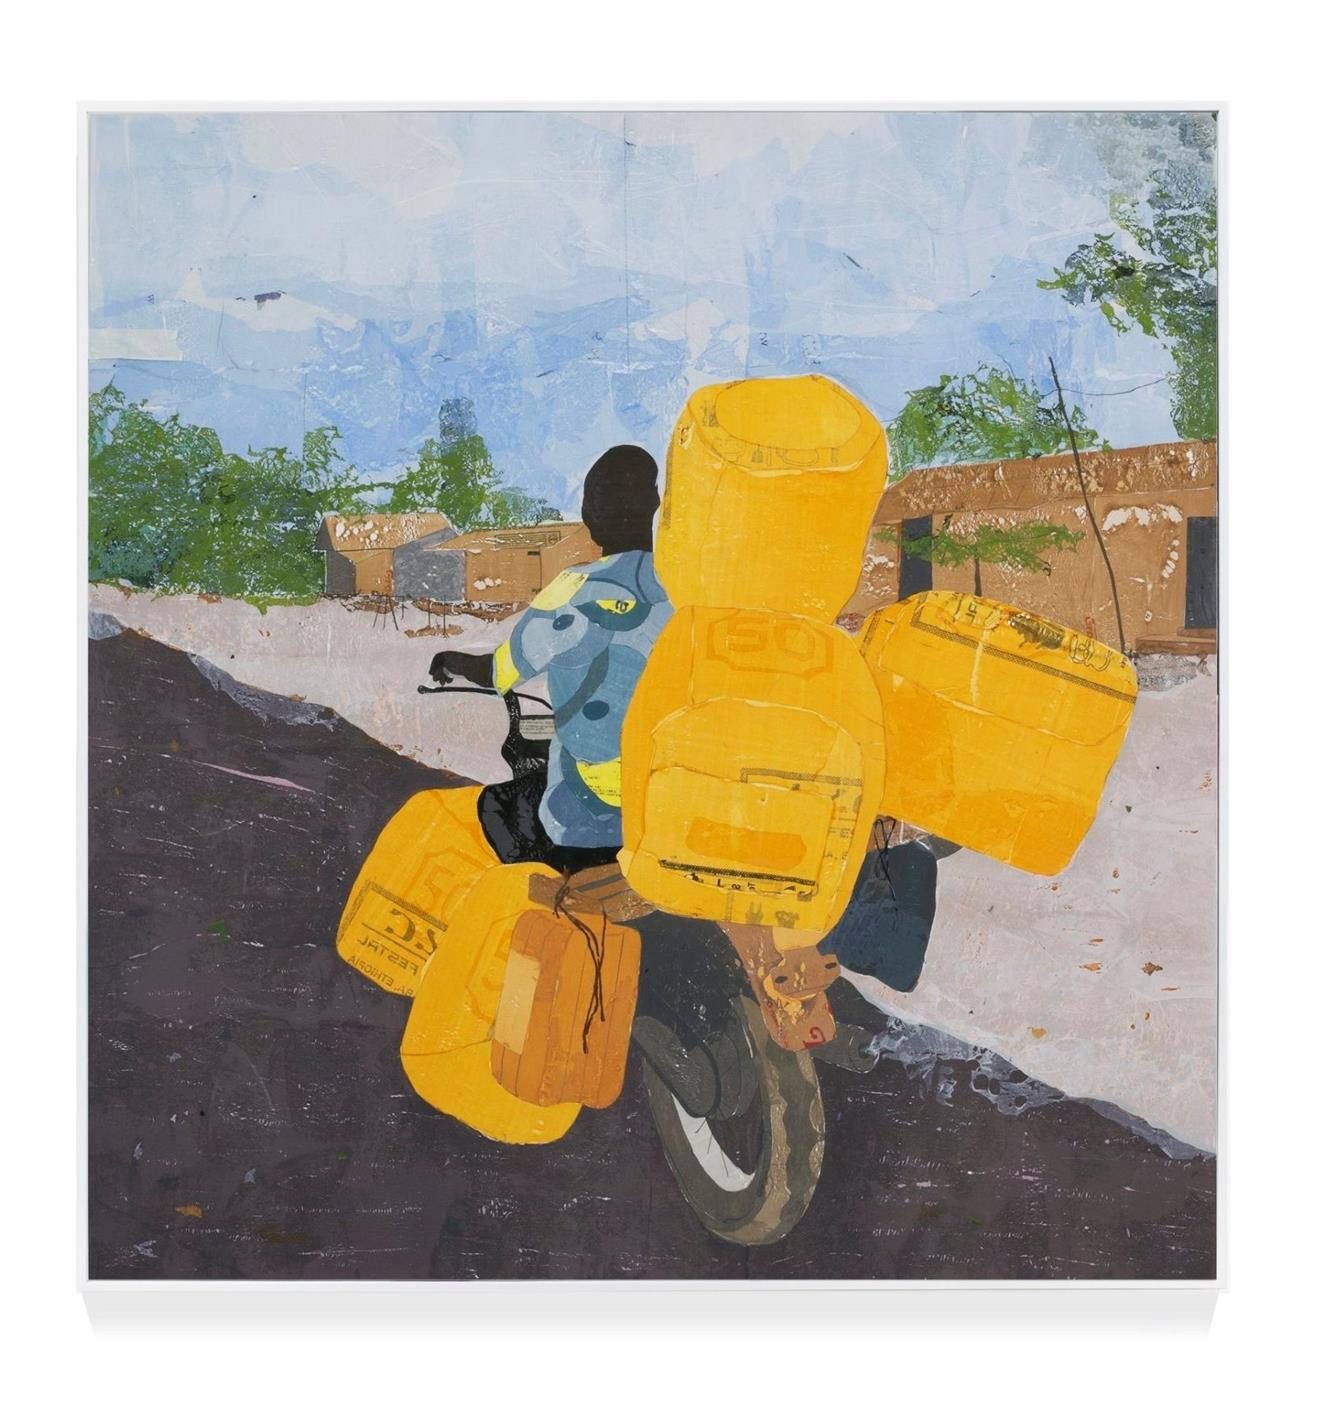 Hugo McCloud, 5 on #7, 2019, plastic merchandise bags on wood panel, 73 x 71 inches © Hugo McCloud Courtesy: the artist and Sean Kelly, New York